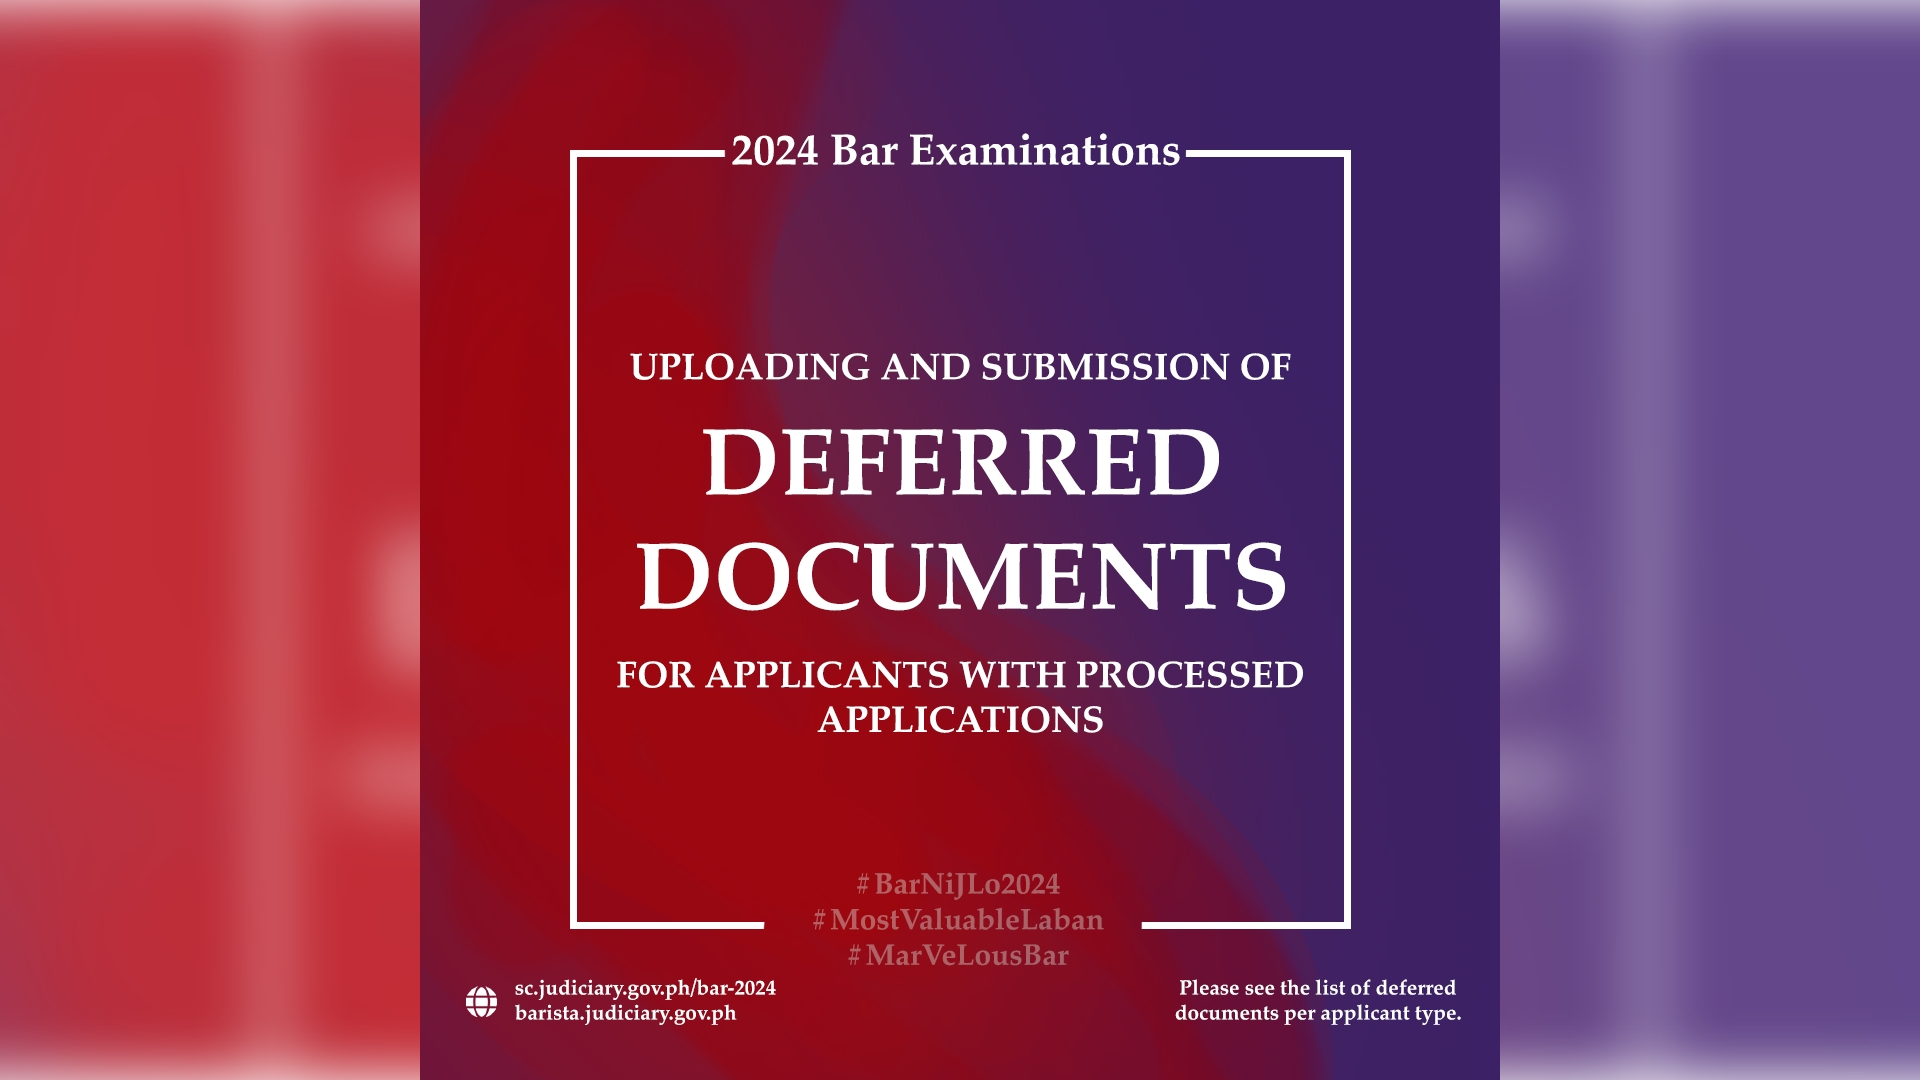 Reopening the application website for the 2024 Bar Exam